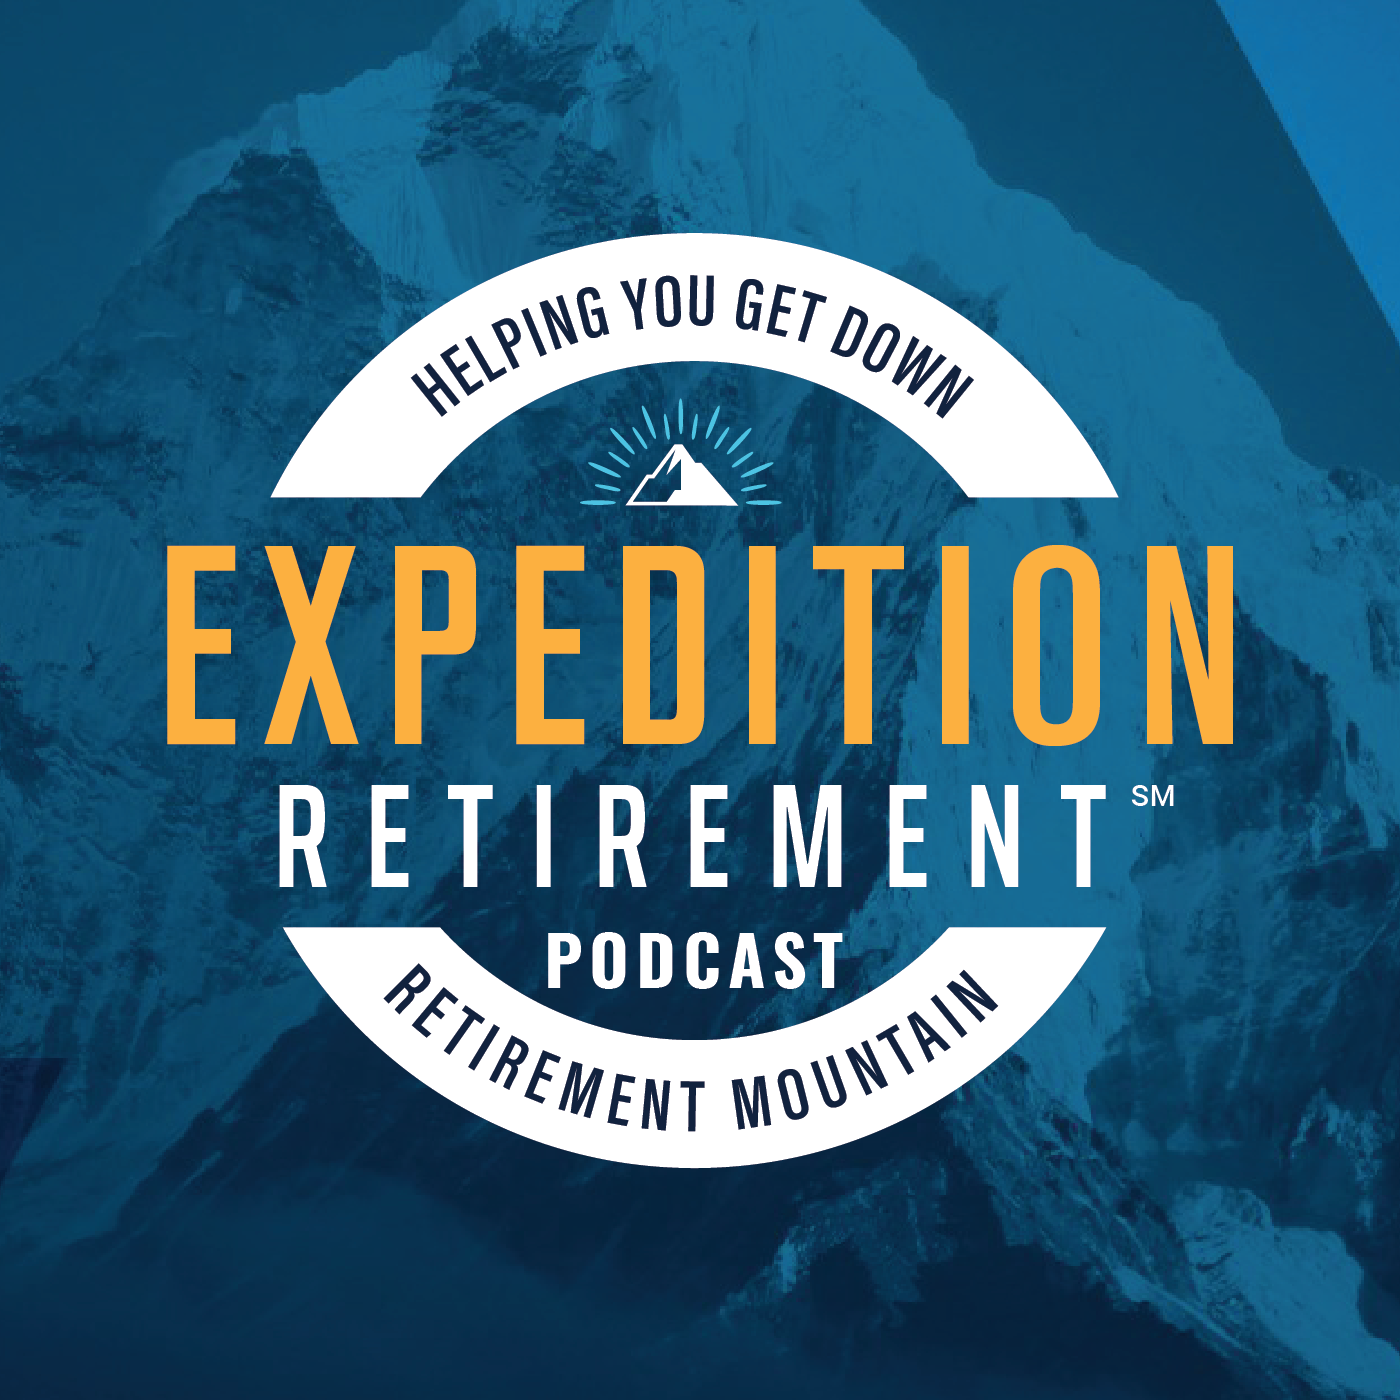 Should you be moving money because of interest rates? | What are your options for using your 401(k) in retirement? | Can you retire on 600k?  | Airline baggage fees and financial industry fees have something in common | Is retirement stupid?